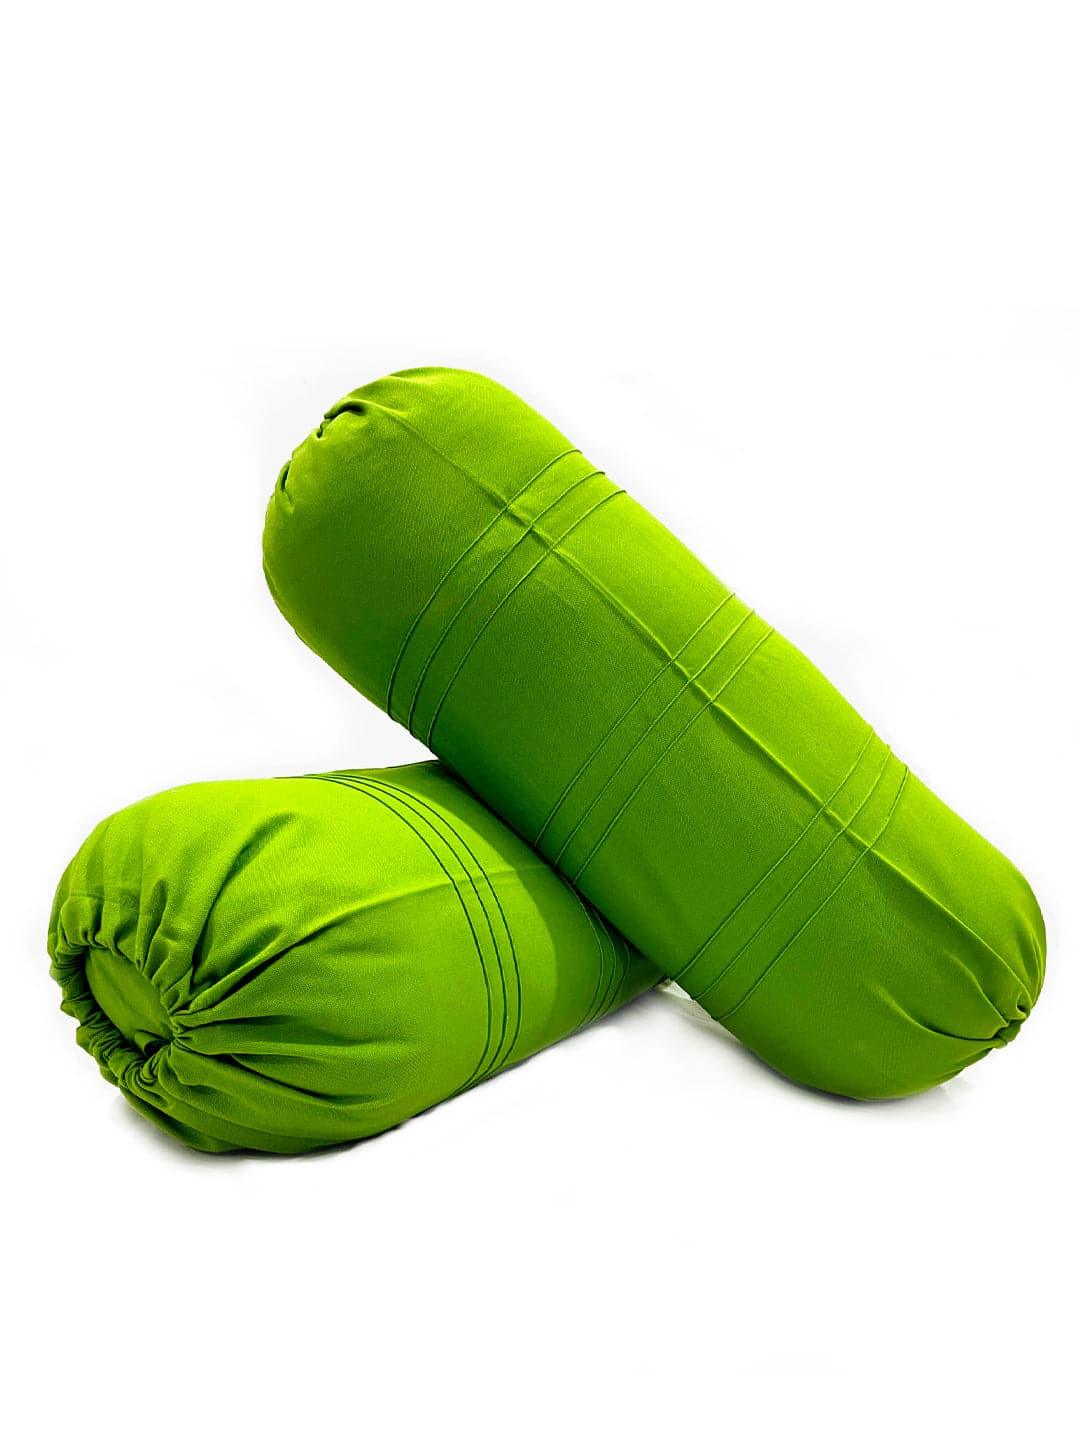 Buy Bolster Covers - Norae Bloster Cover (Green) - Set Of Two at Vaaree online